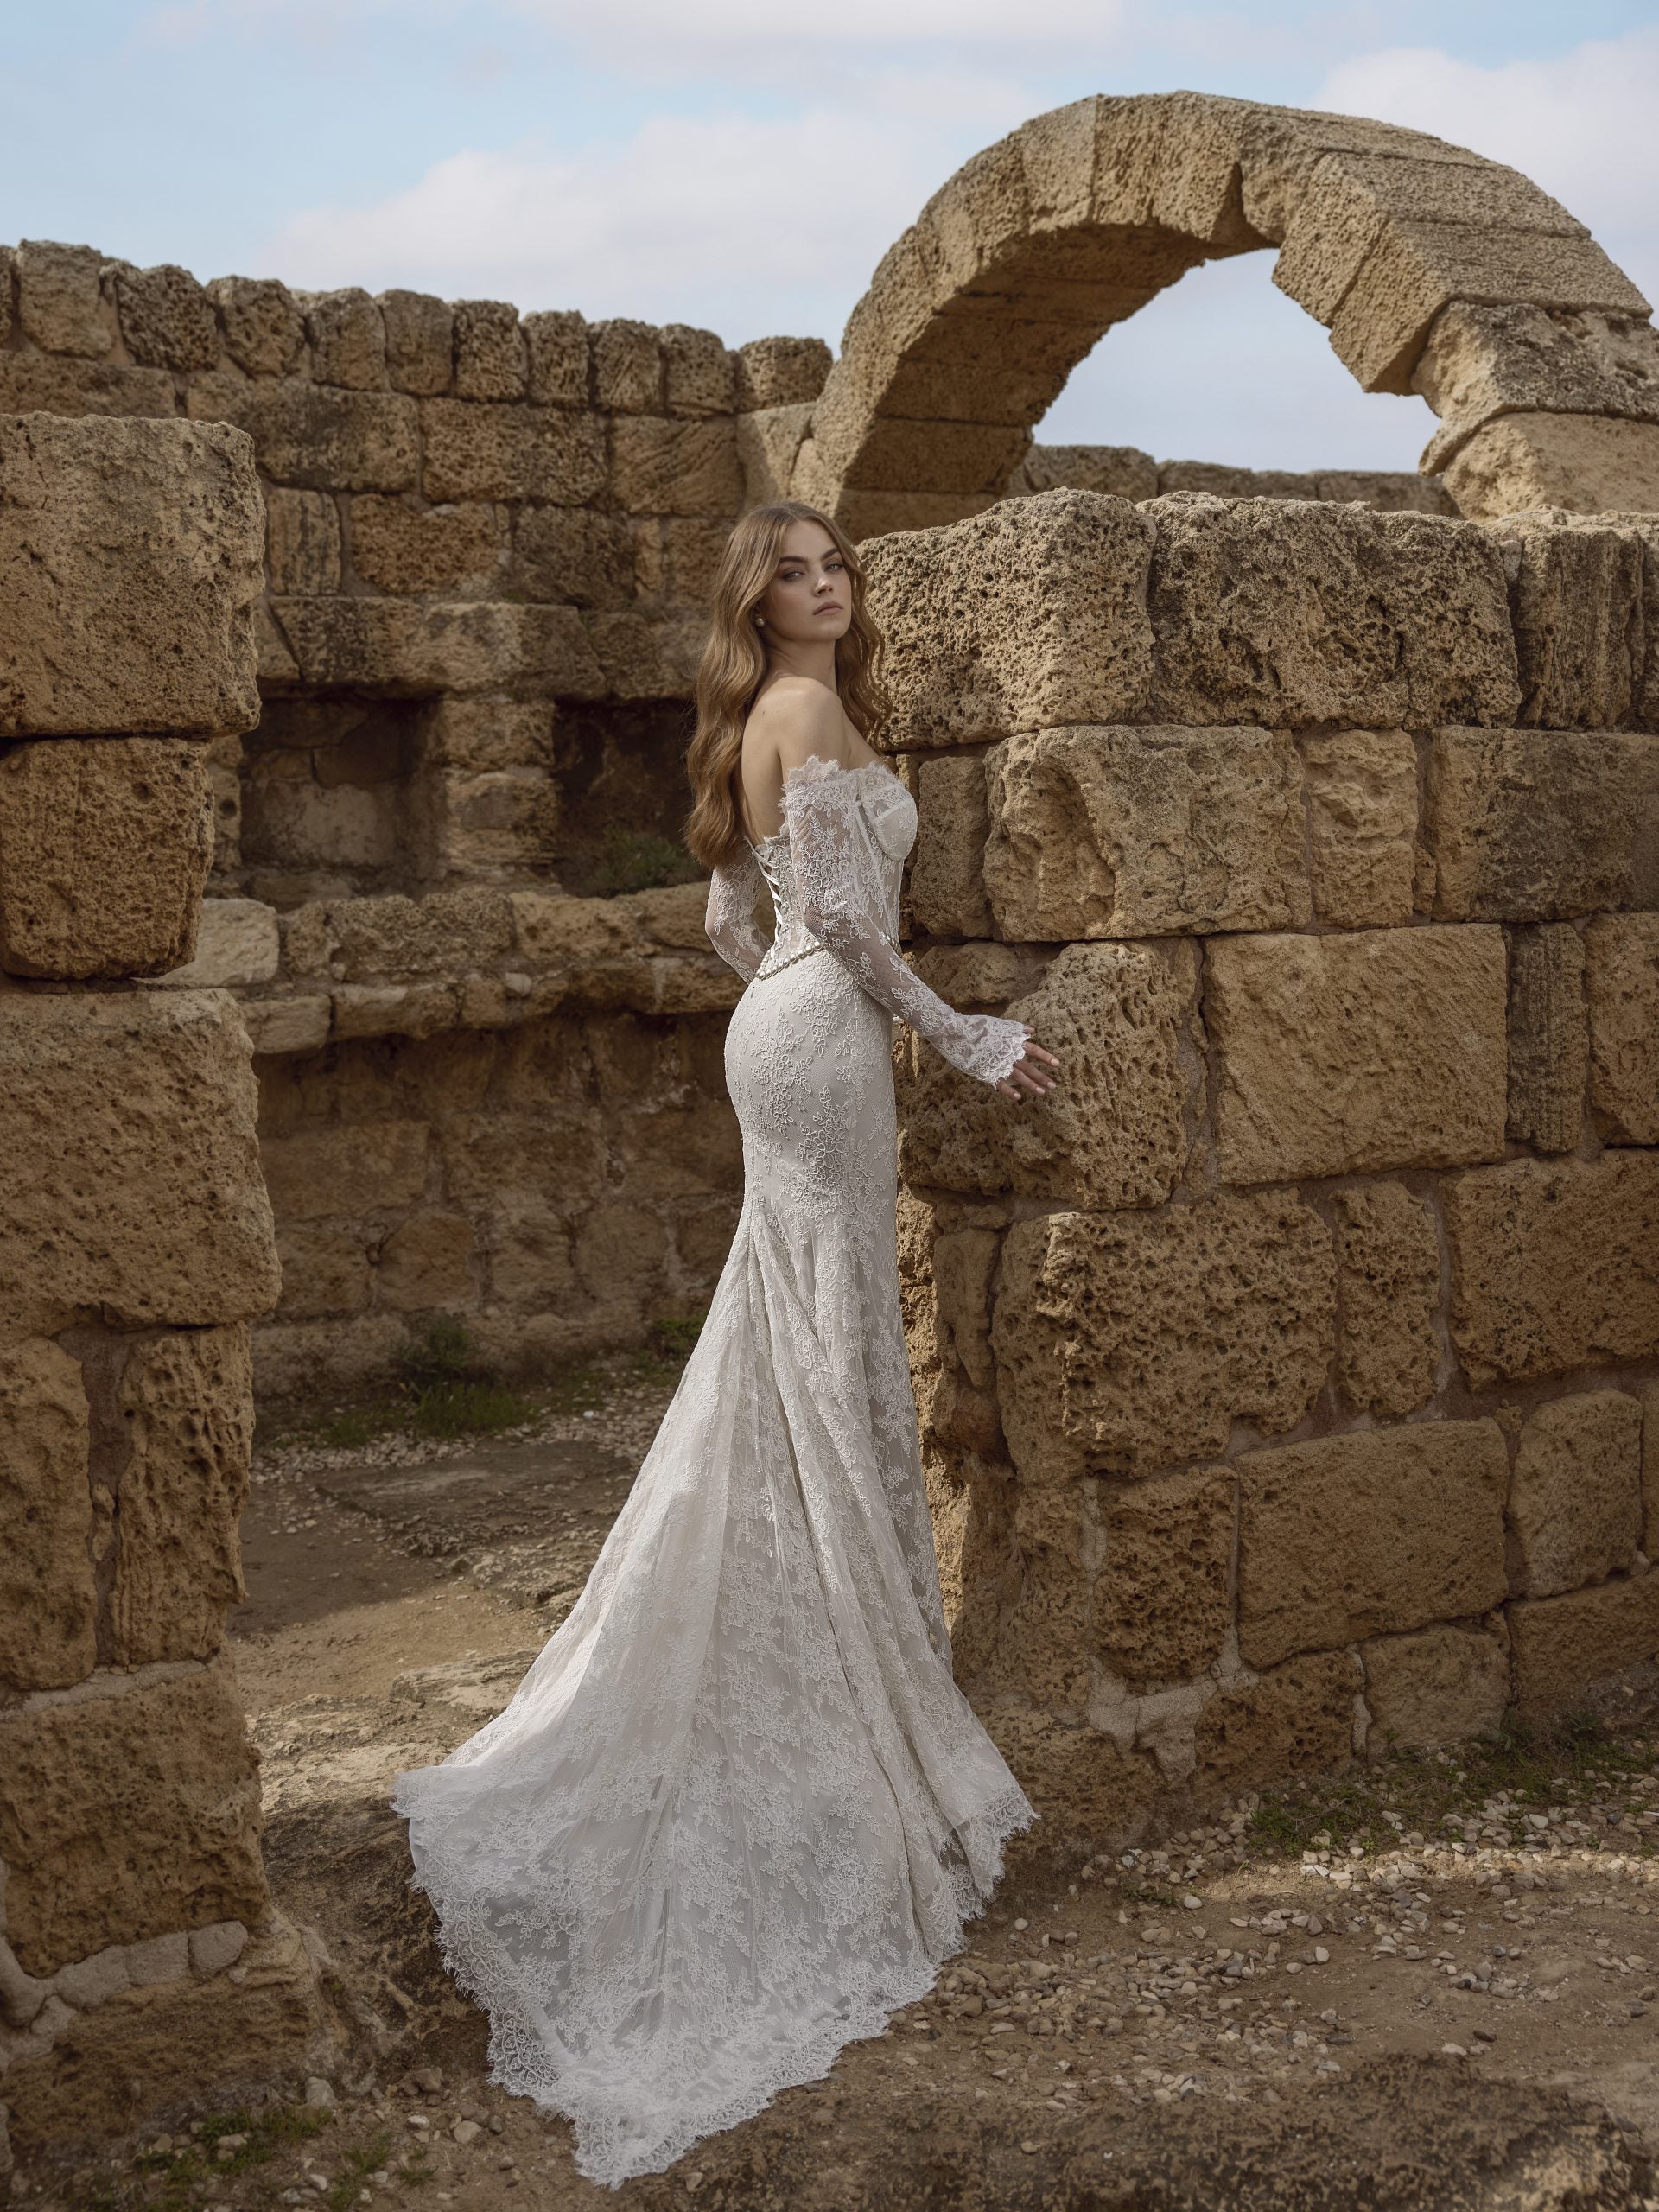 Long Sleeve Lace Fit And Flare Wedding Dress by Love by Pnina Tornai - Image 2